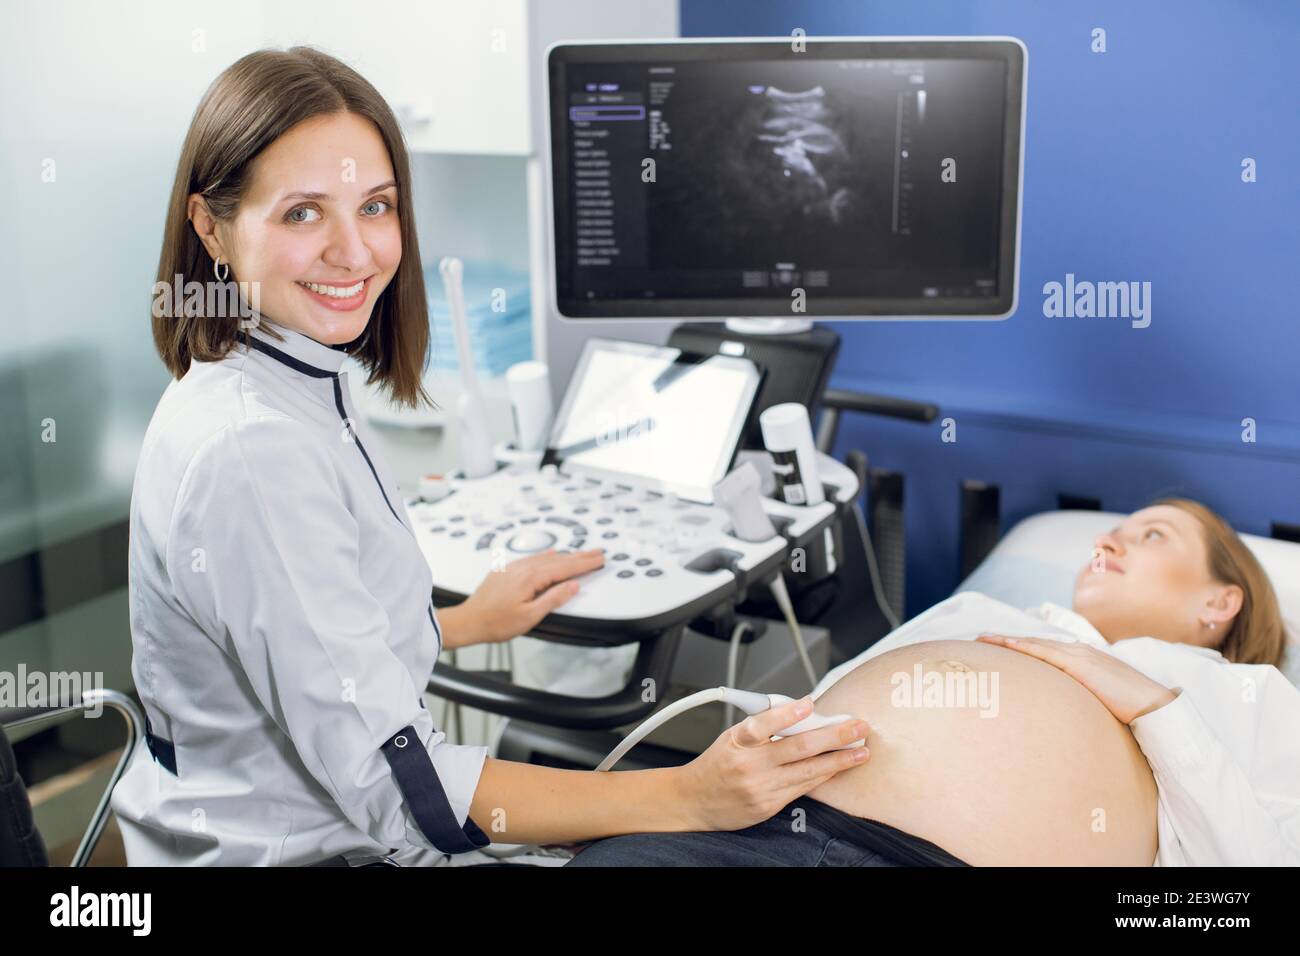 Close Up Portrait Of Cheerful Professional Woman Obstetrician Conducting Ultrasound Scan For 